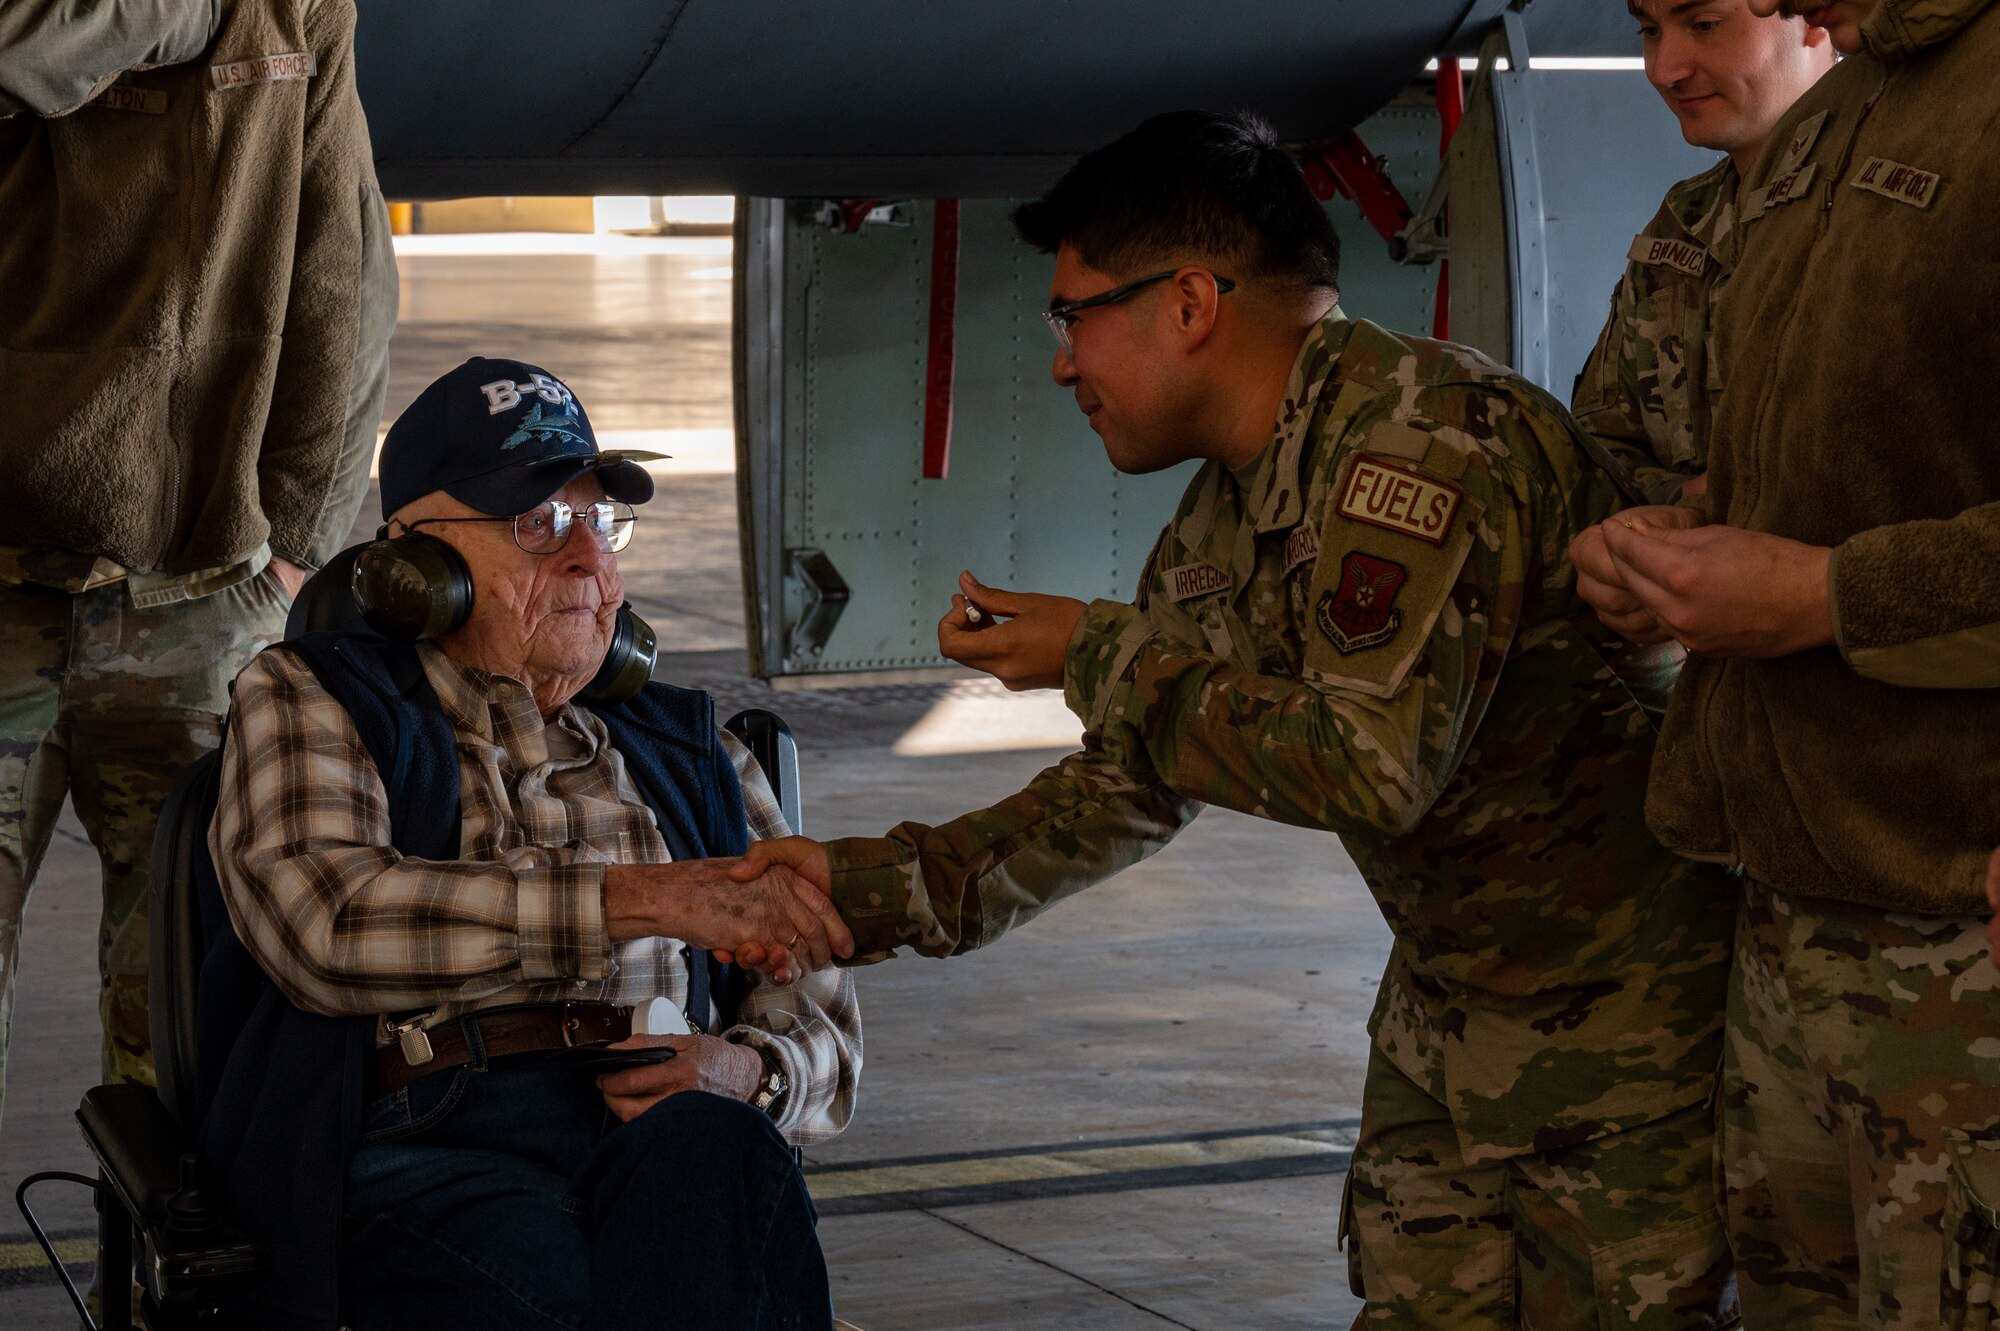 Airman Joshua Arreguin, a 2nd Maintenance Squadron fuel system specialist, shakes hands with retired Senior Master Sgt. John McNeece during McNeece's tour at Barksdale Air Force Base, La., October 18, 2023. McNeece was among the first generation of B-52 maintainers during his time in service from 1952 until 1975. (U.S. Air Force photo by Airman 1st Class Seth Watson)